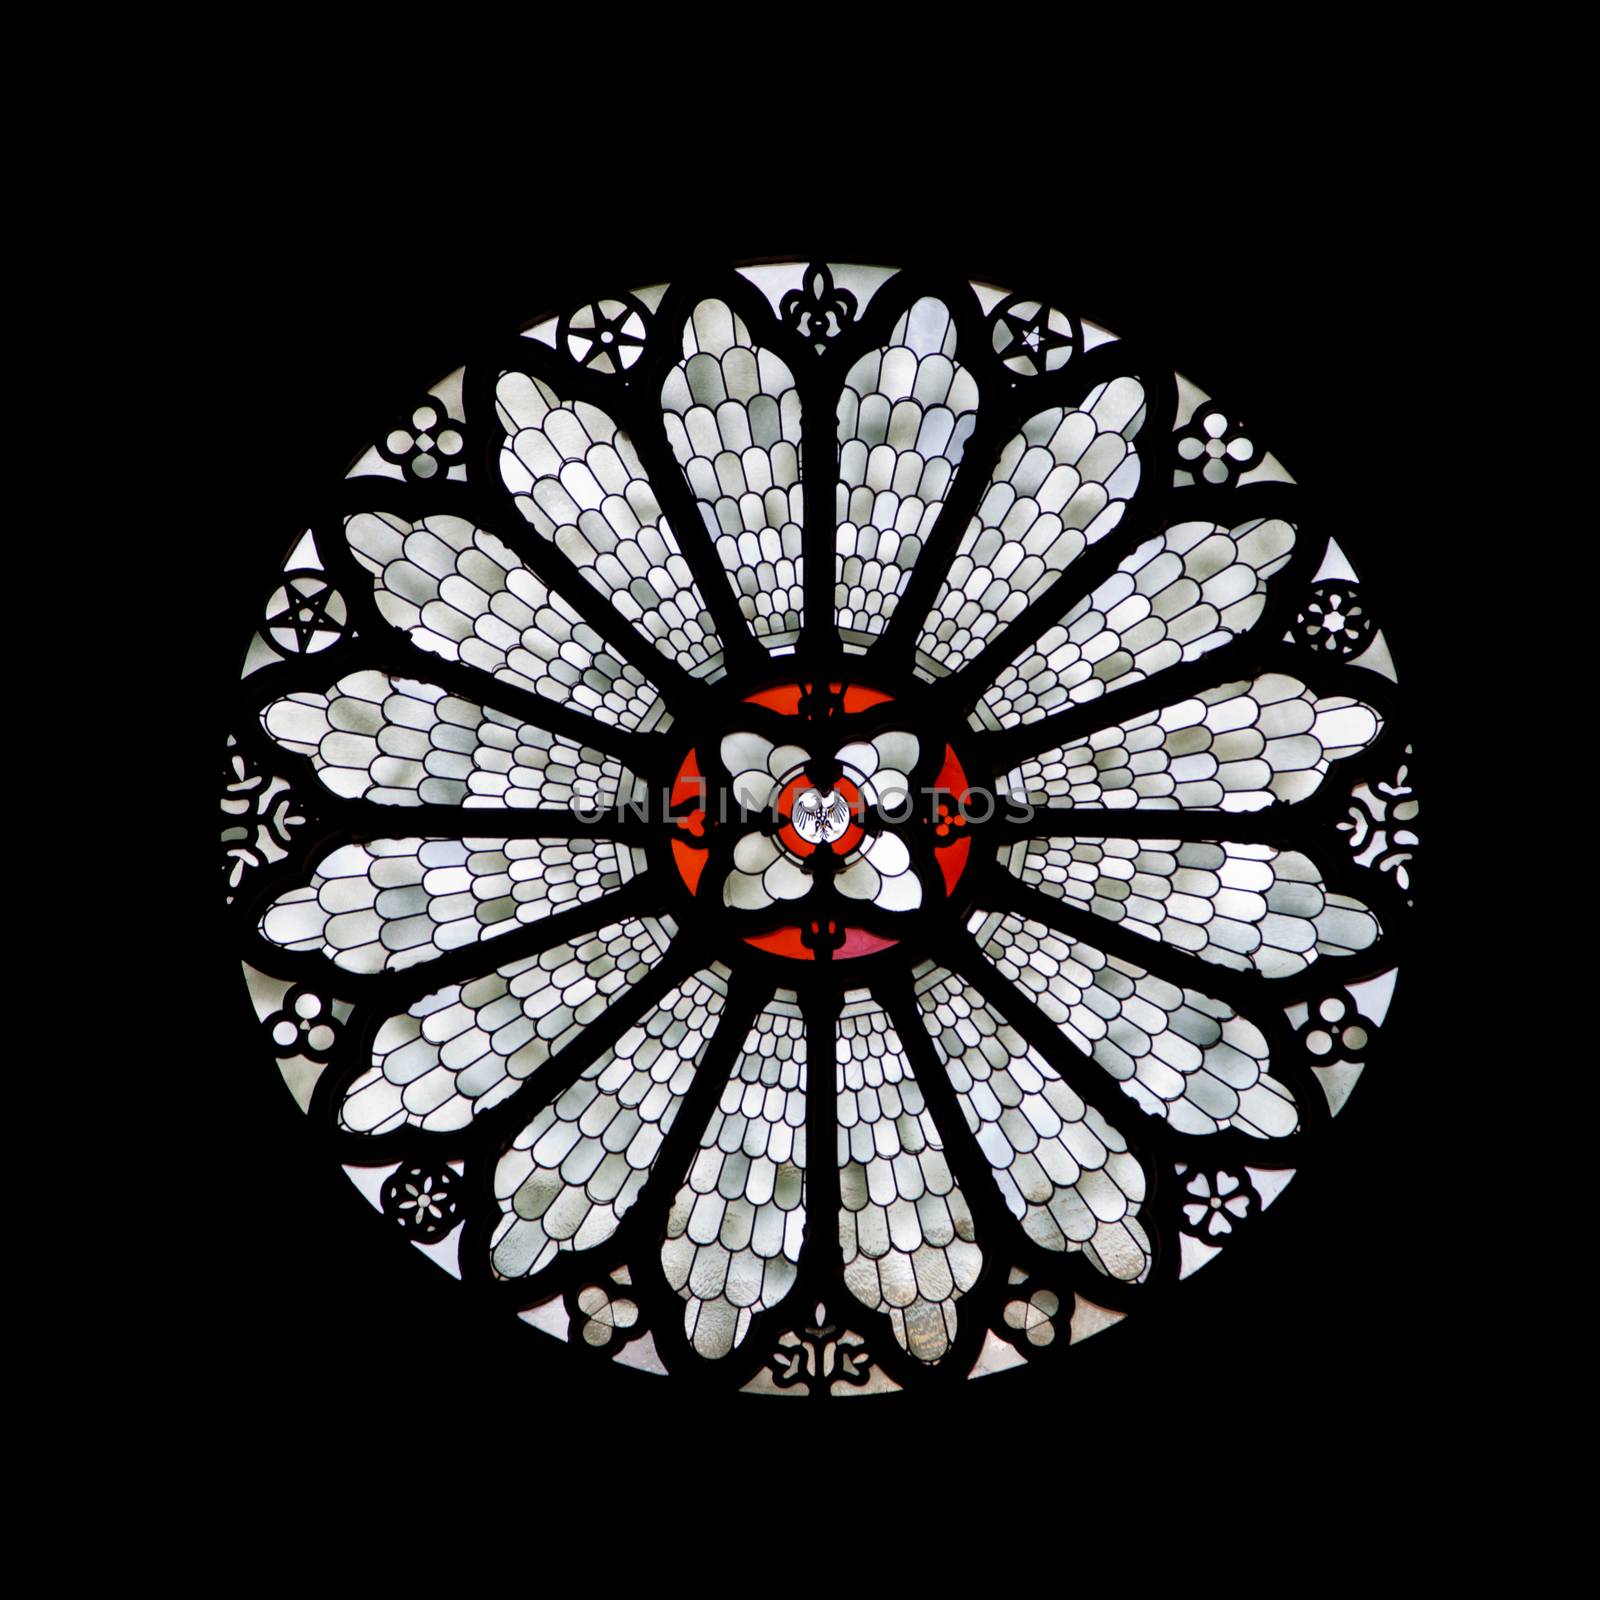 Stained-glass rose window of Trento cathedral, Northern Italy